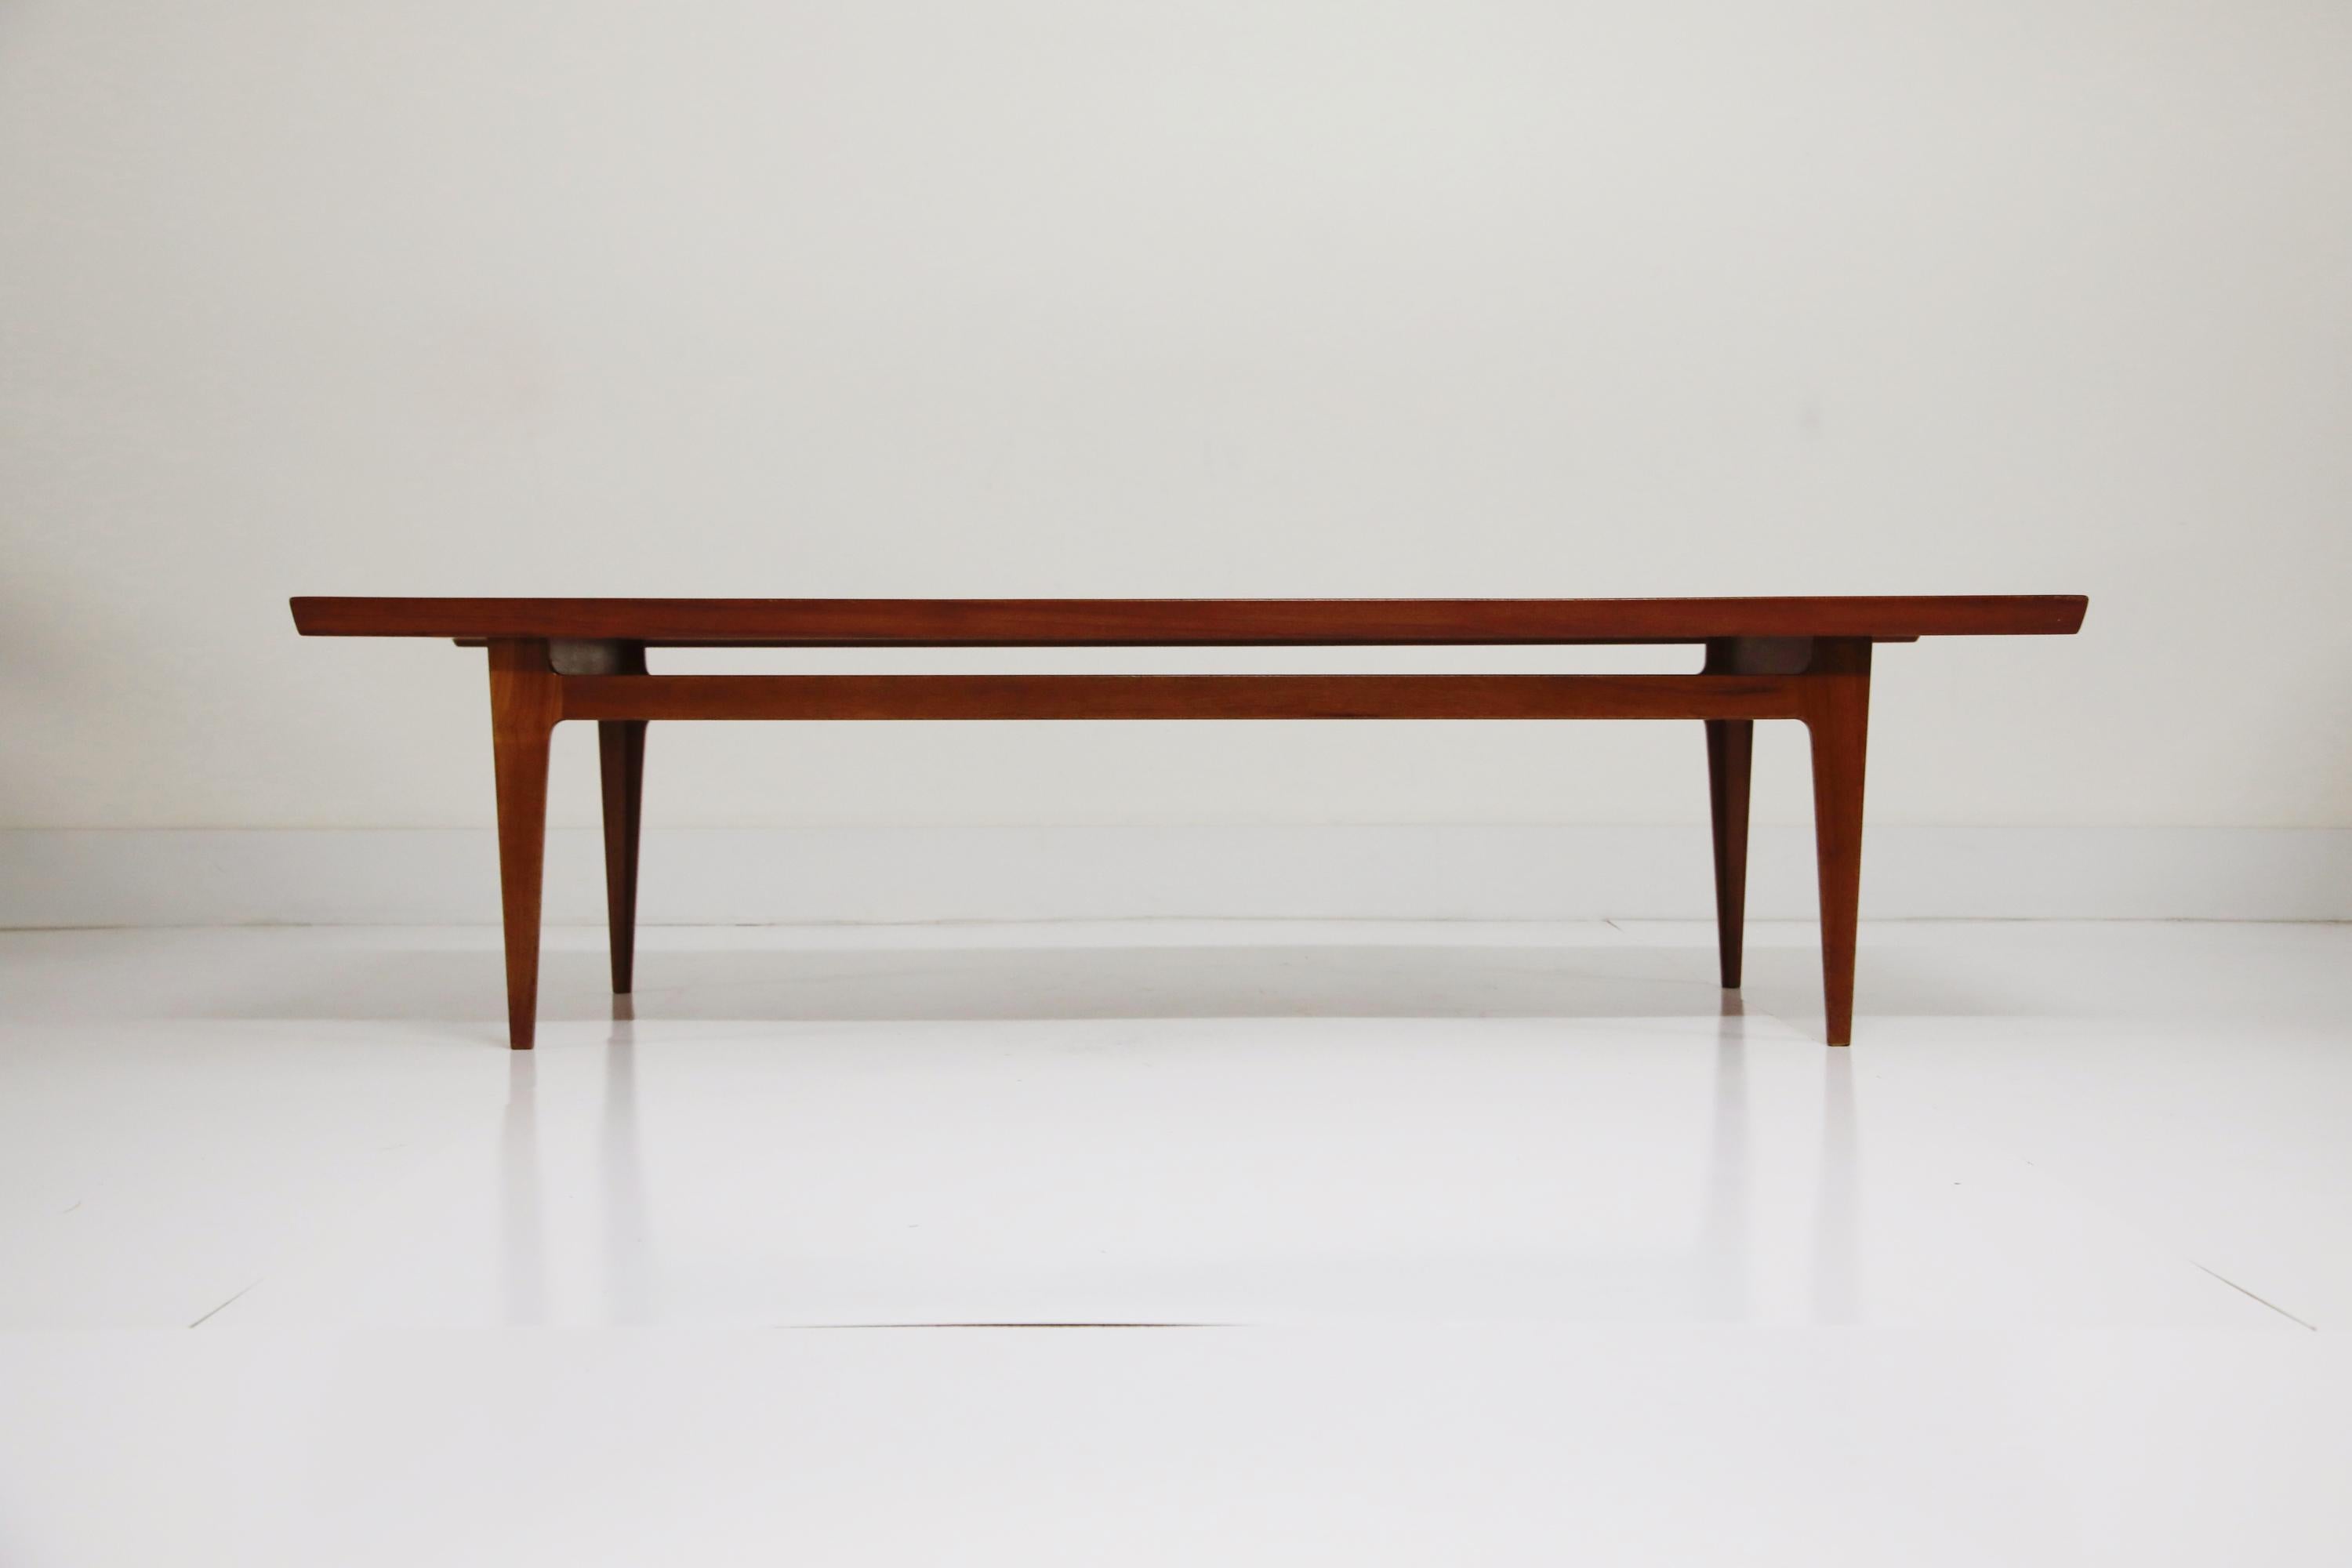 Early production example of the Model FD 532 Finn Juhl for France and Daverkosen teak coffee table. 

This particular example is using teak from the France and Daverkosen days, demonstrated by the FD stamped logo underneath the table (see photos),